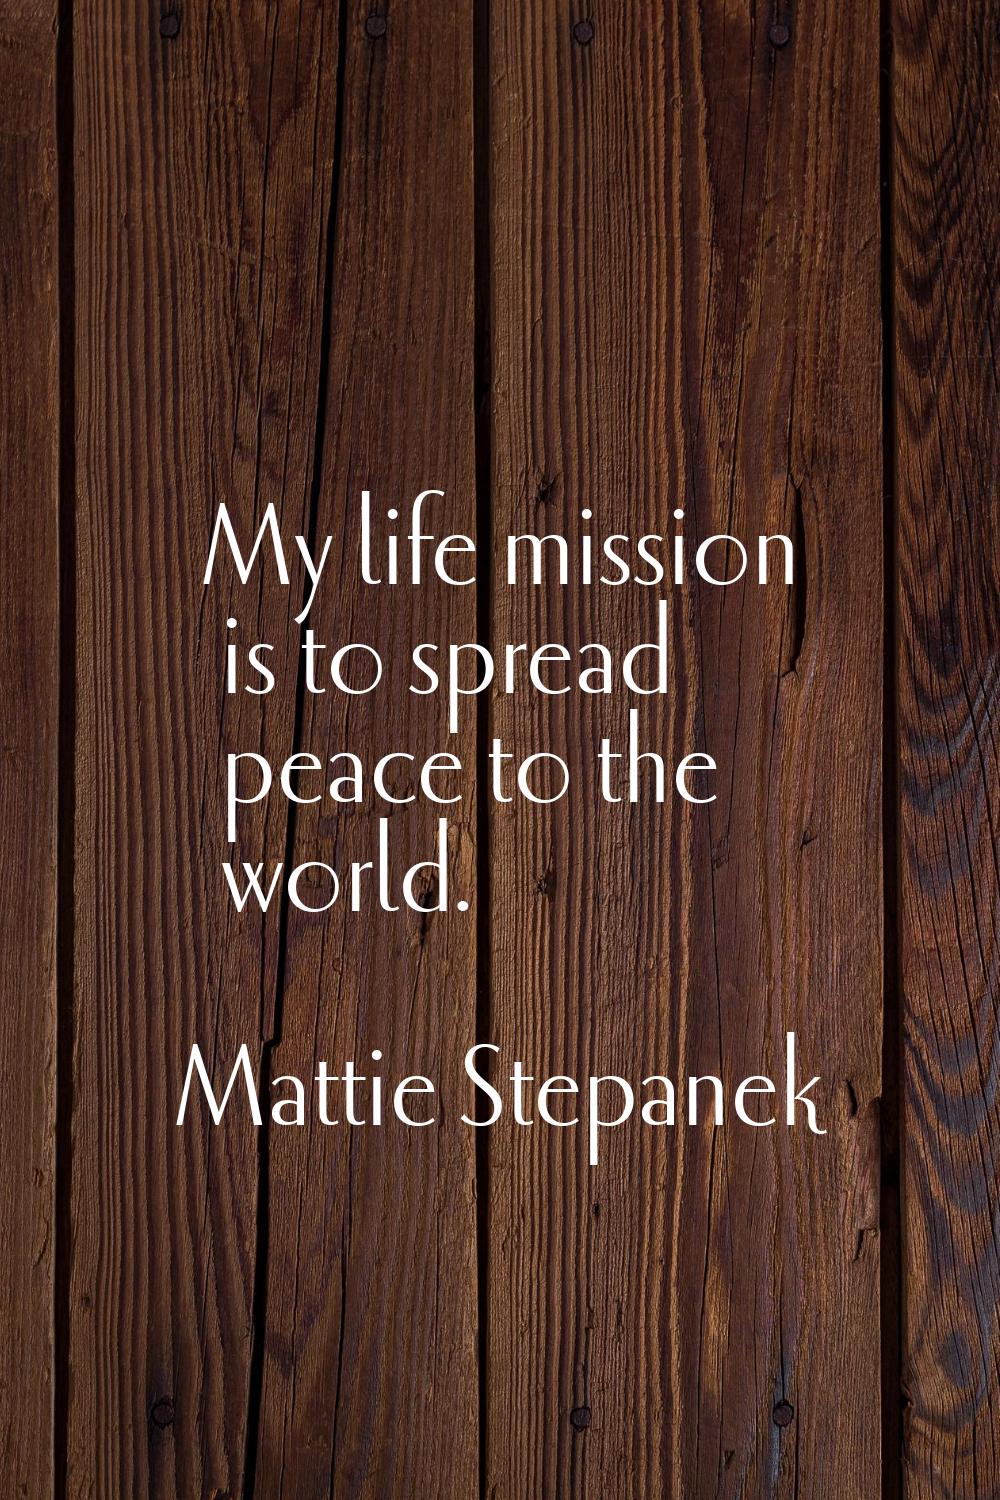 My life mission is to spread peace to the world.